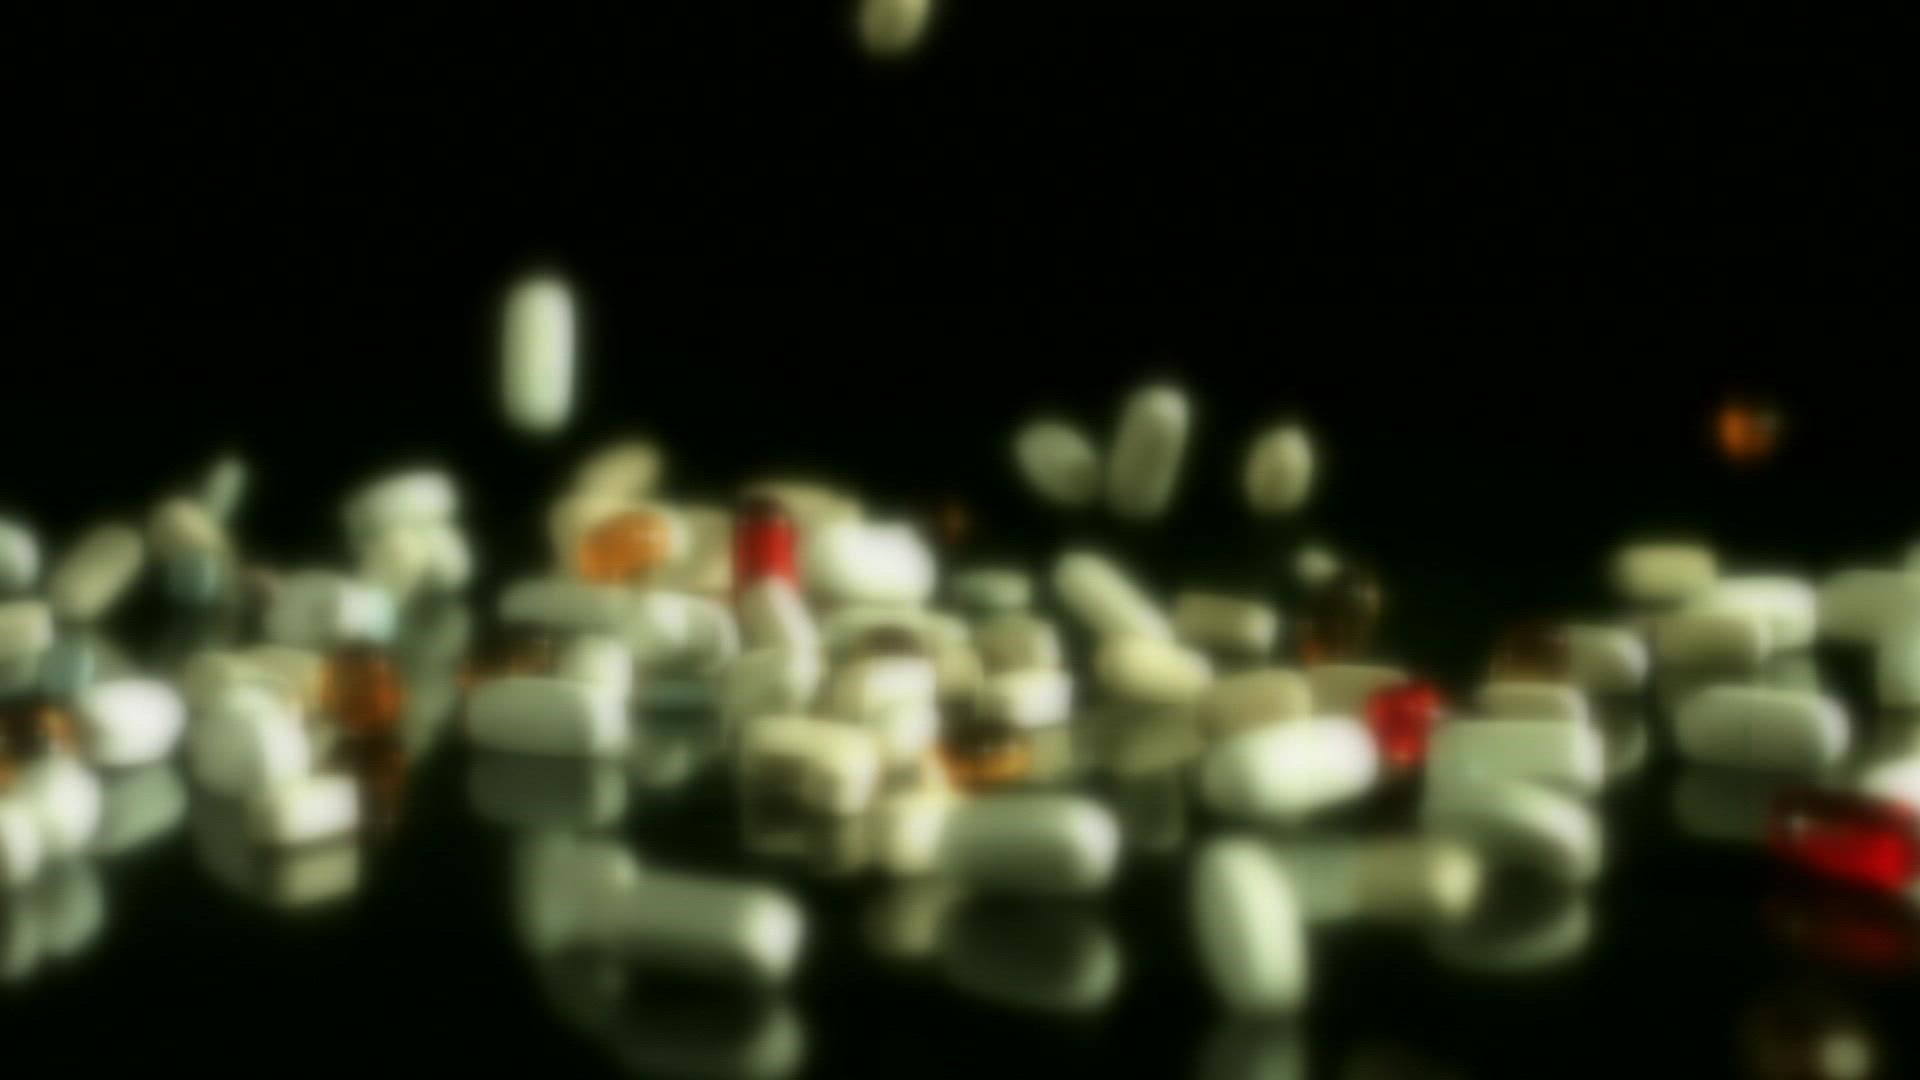 According to the Lancet,  1.2 million people are estimated to die from opioid overdoses by 2029